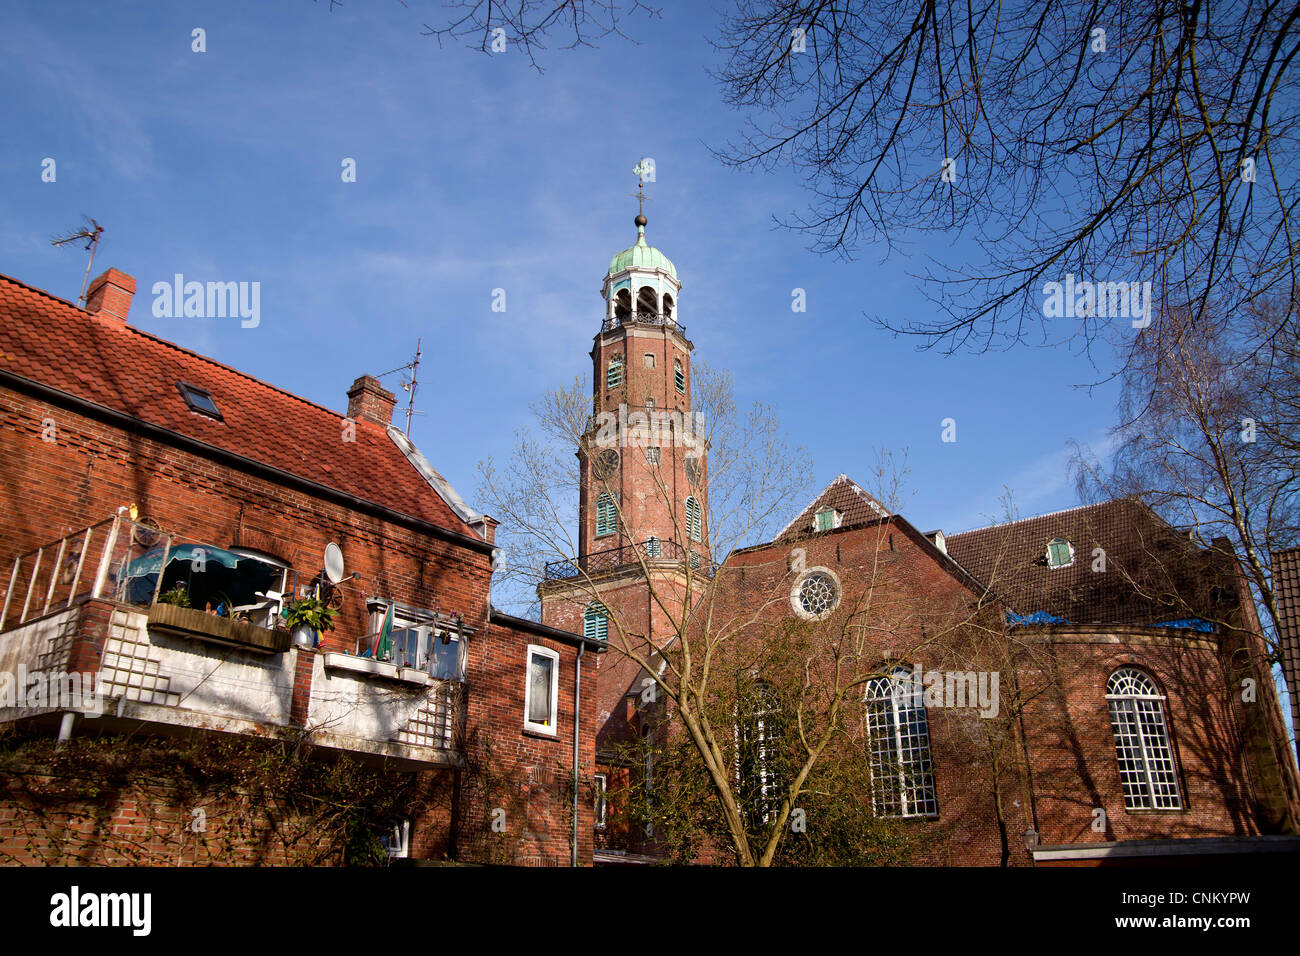 the church Große Kirche, head offic of the German Reformed Church in Leer, , East Frisia, Lower Saxony, Germany Stock Photo